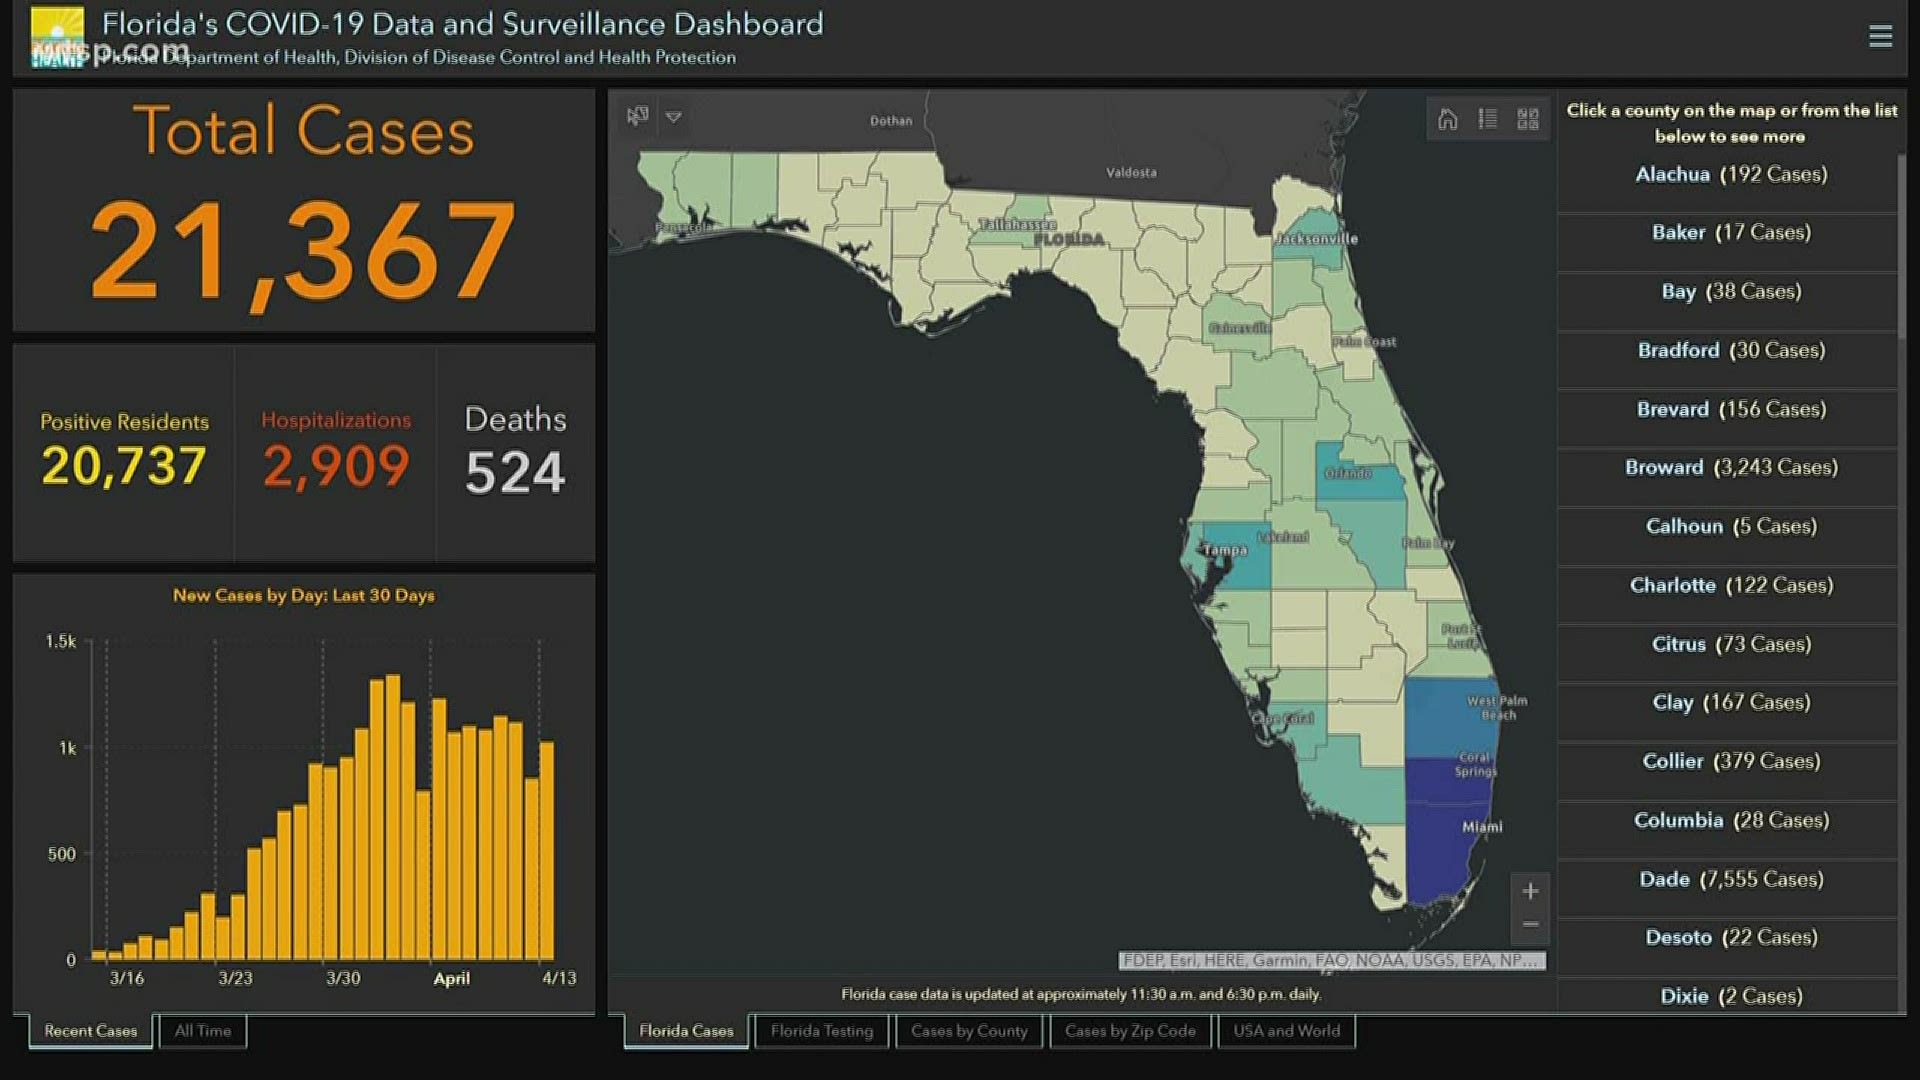 The number of coronavirus cases in Florida continues to rise.